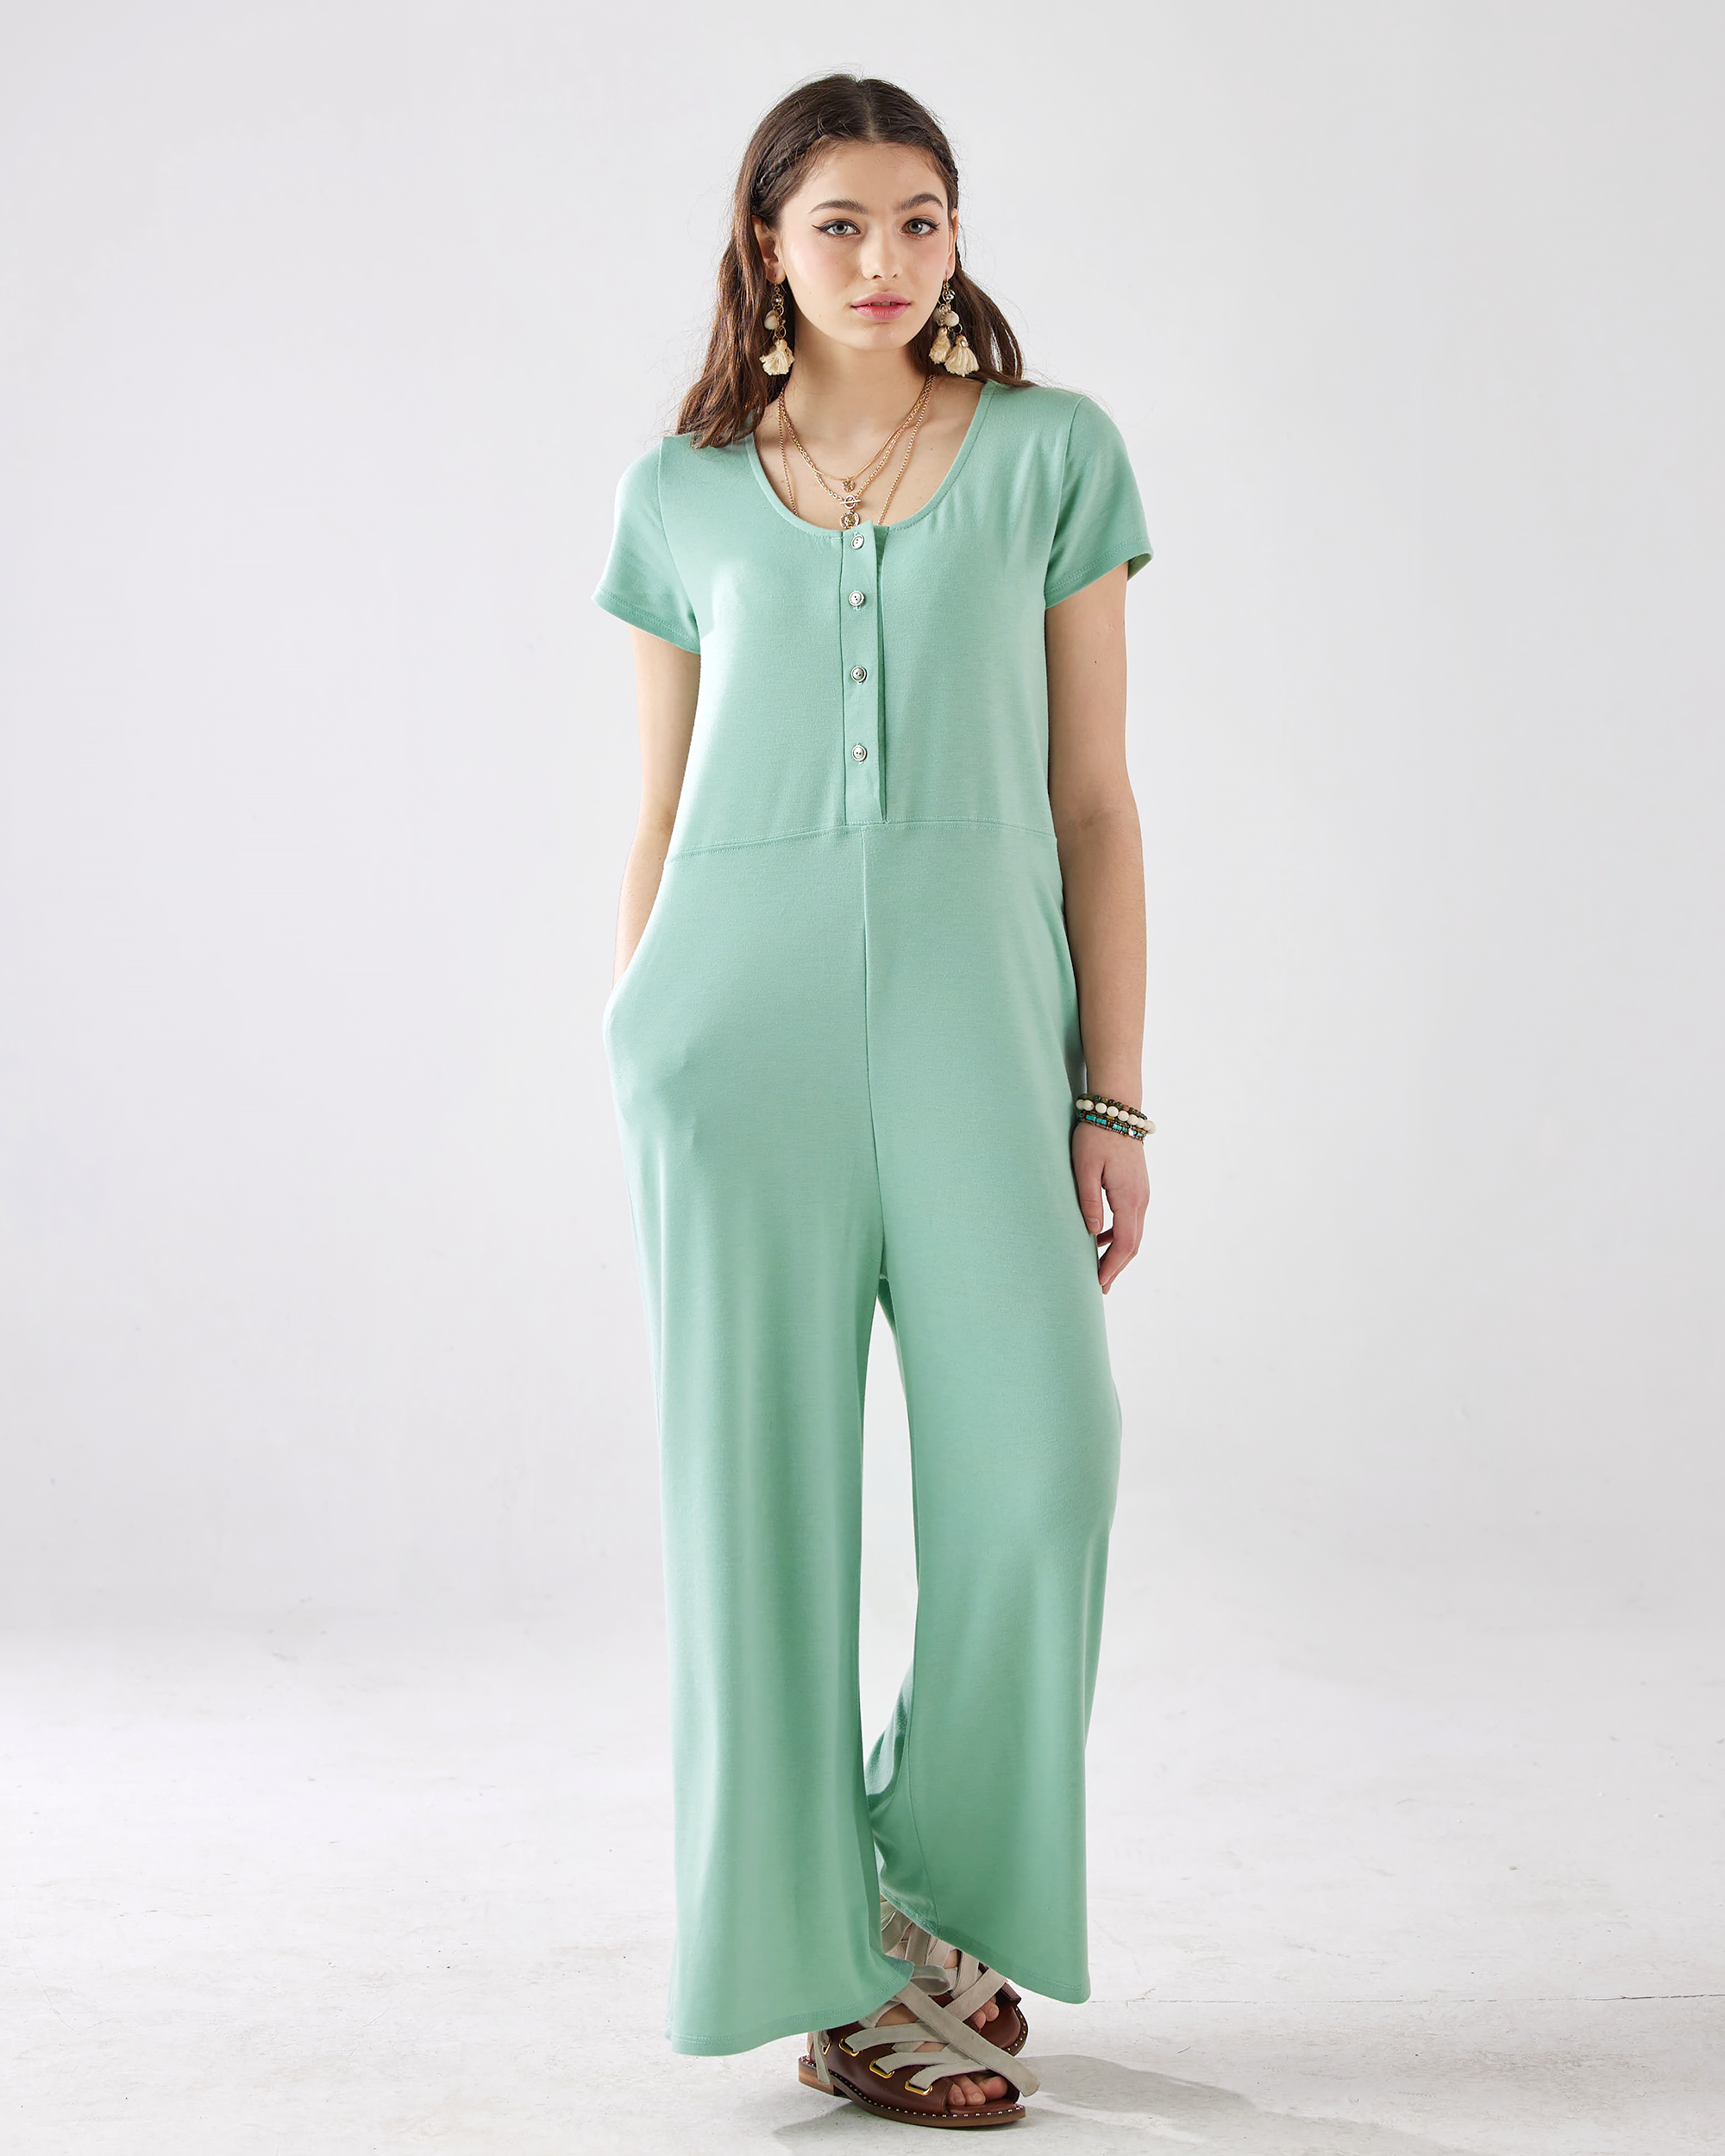 Washed Mint Jumpsuit: Fresh Button-Up Style